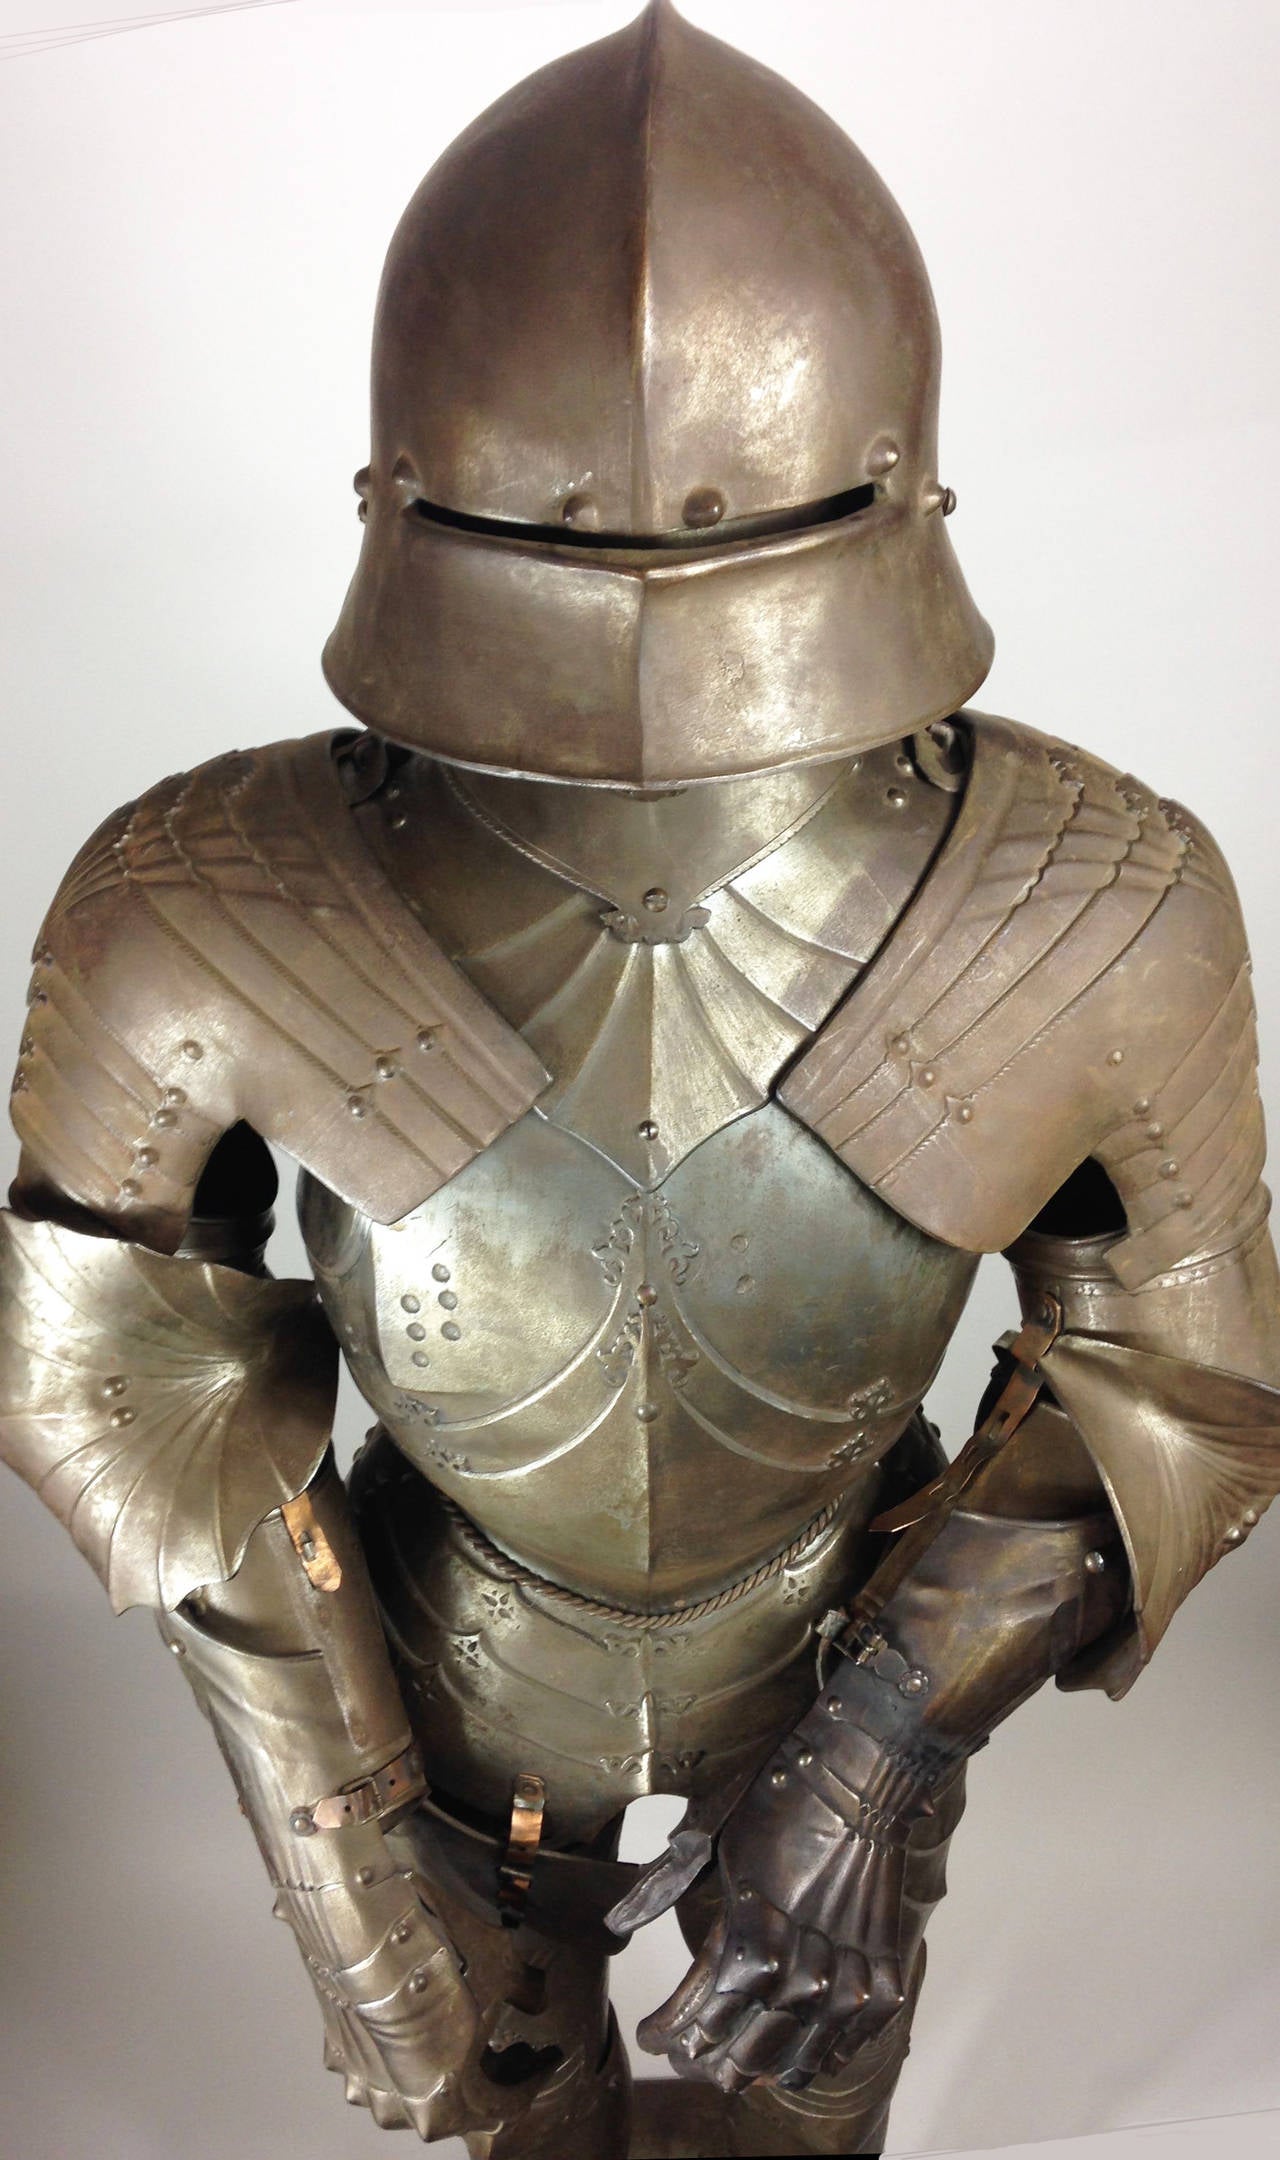 A finely made full-size cast iron armour in the Gothic style.

Most probably dating from the late 19th century, with fixed torso, legs and base, with additional separate elements such as the helmet, arms, gauntlets etc. 

An extremely heavy item